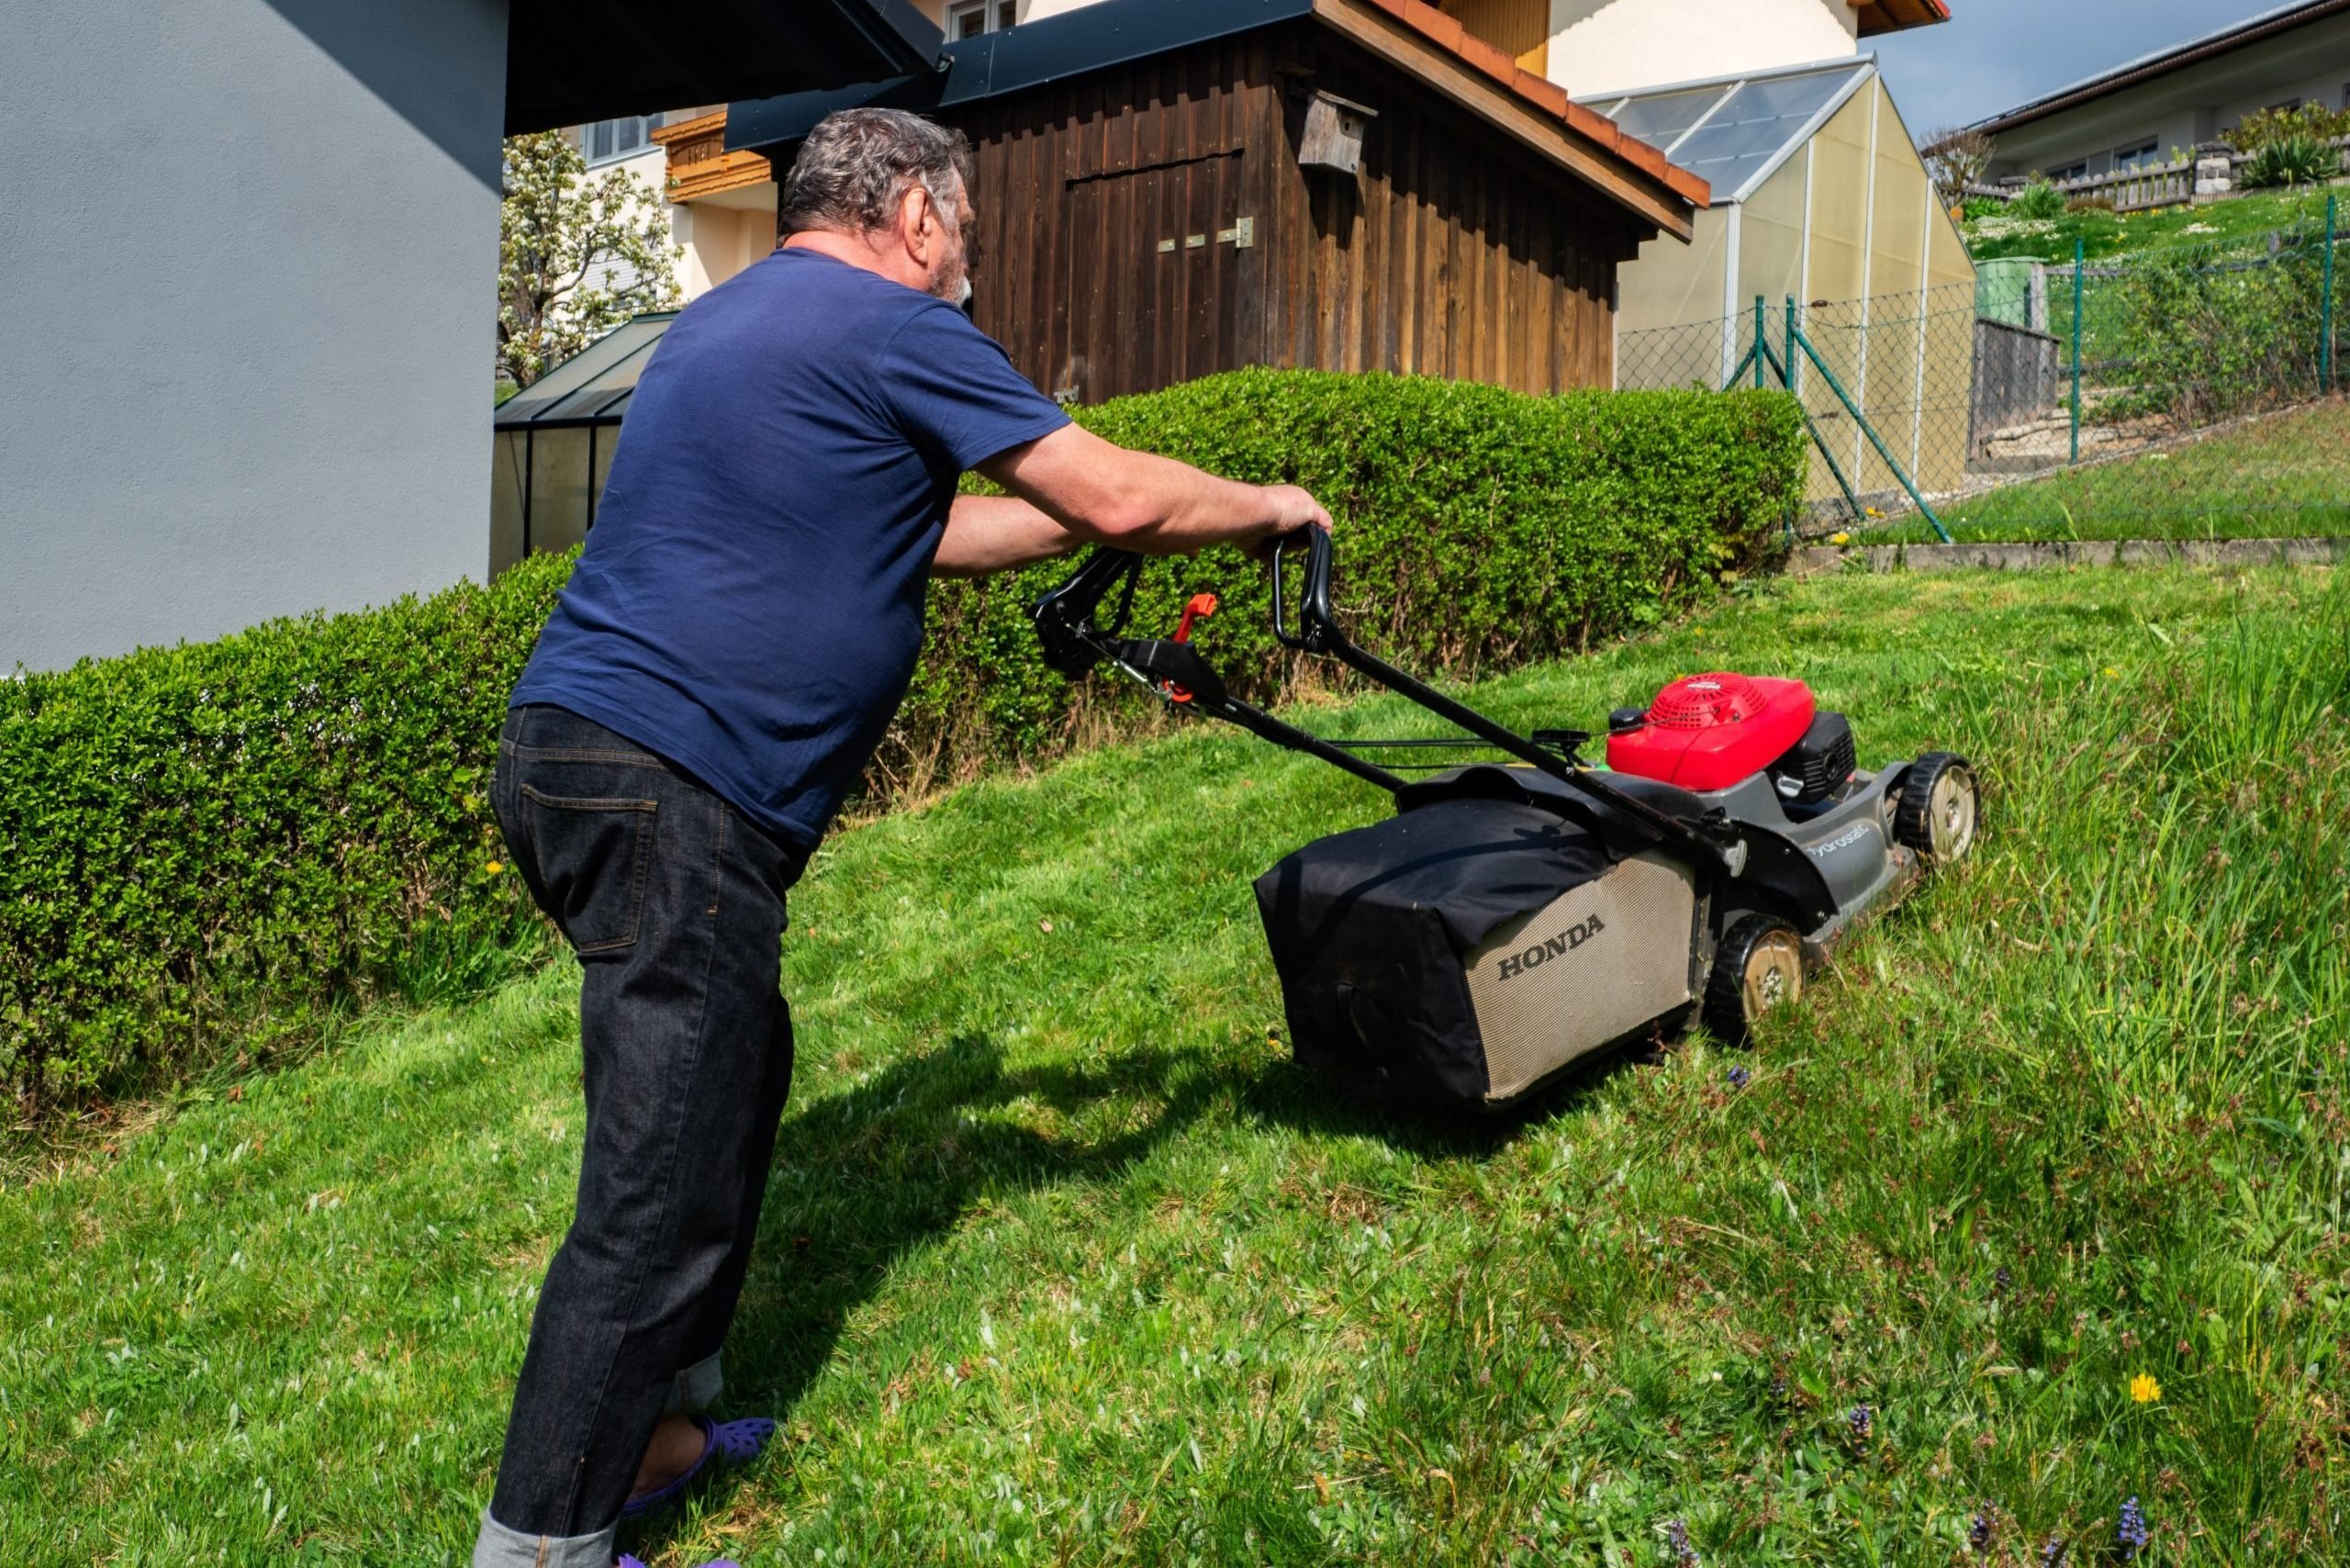 Honda To Stop Manufacturing All Gas Powered Lawn Mowers